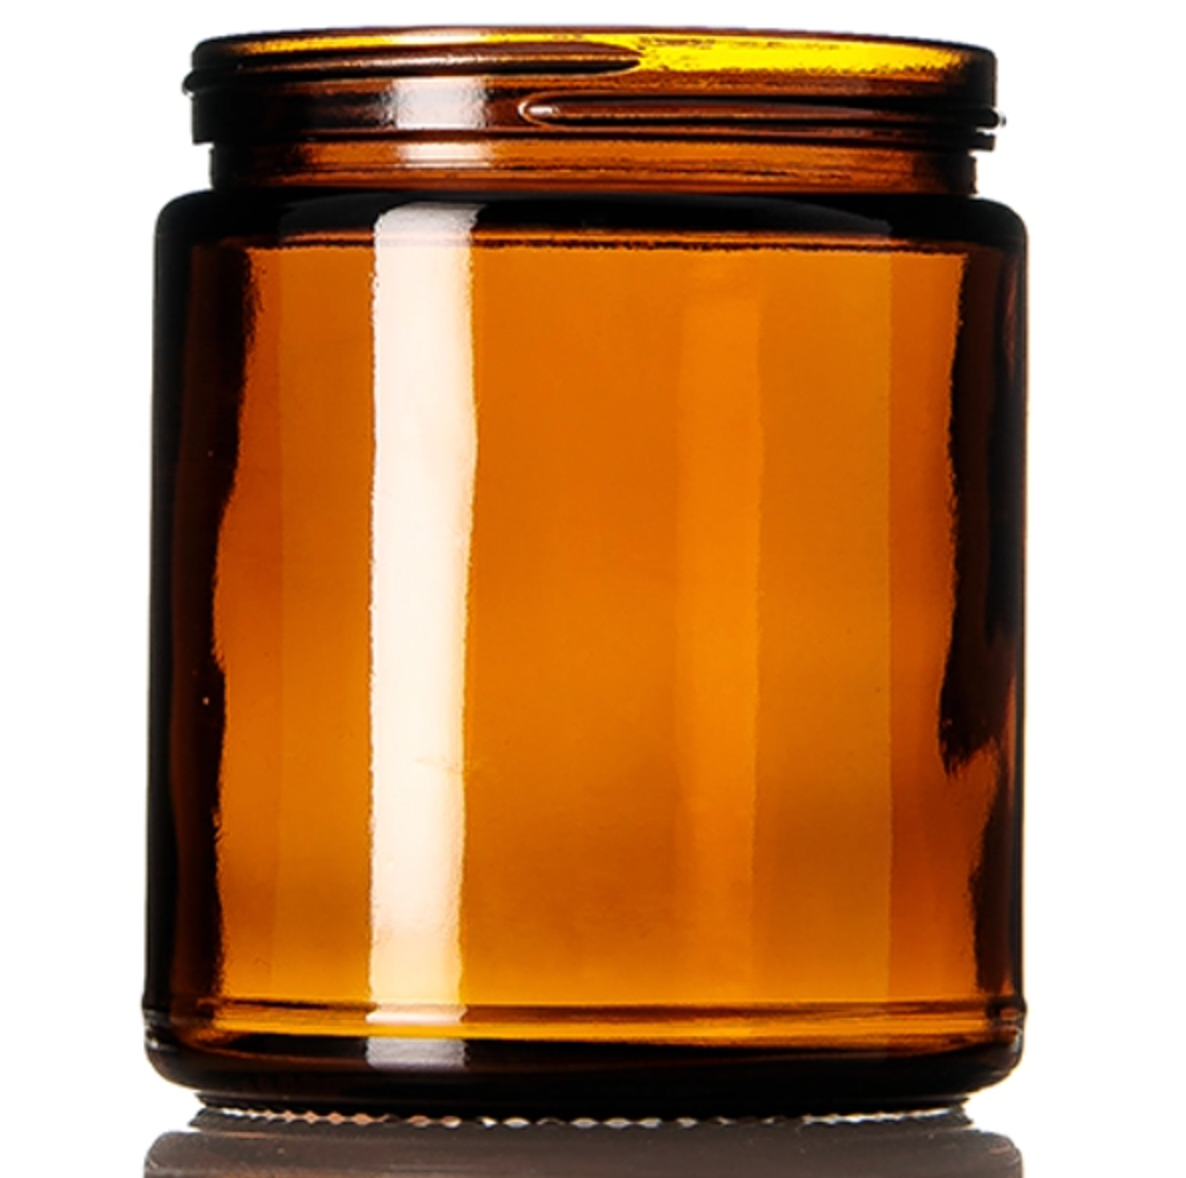 Amber Straight Sided 9 oz Jar,12 per case, Lid Separate Product